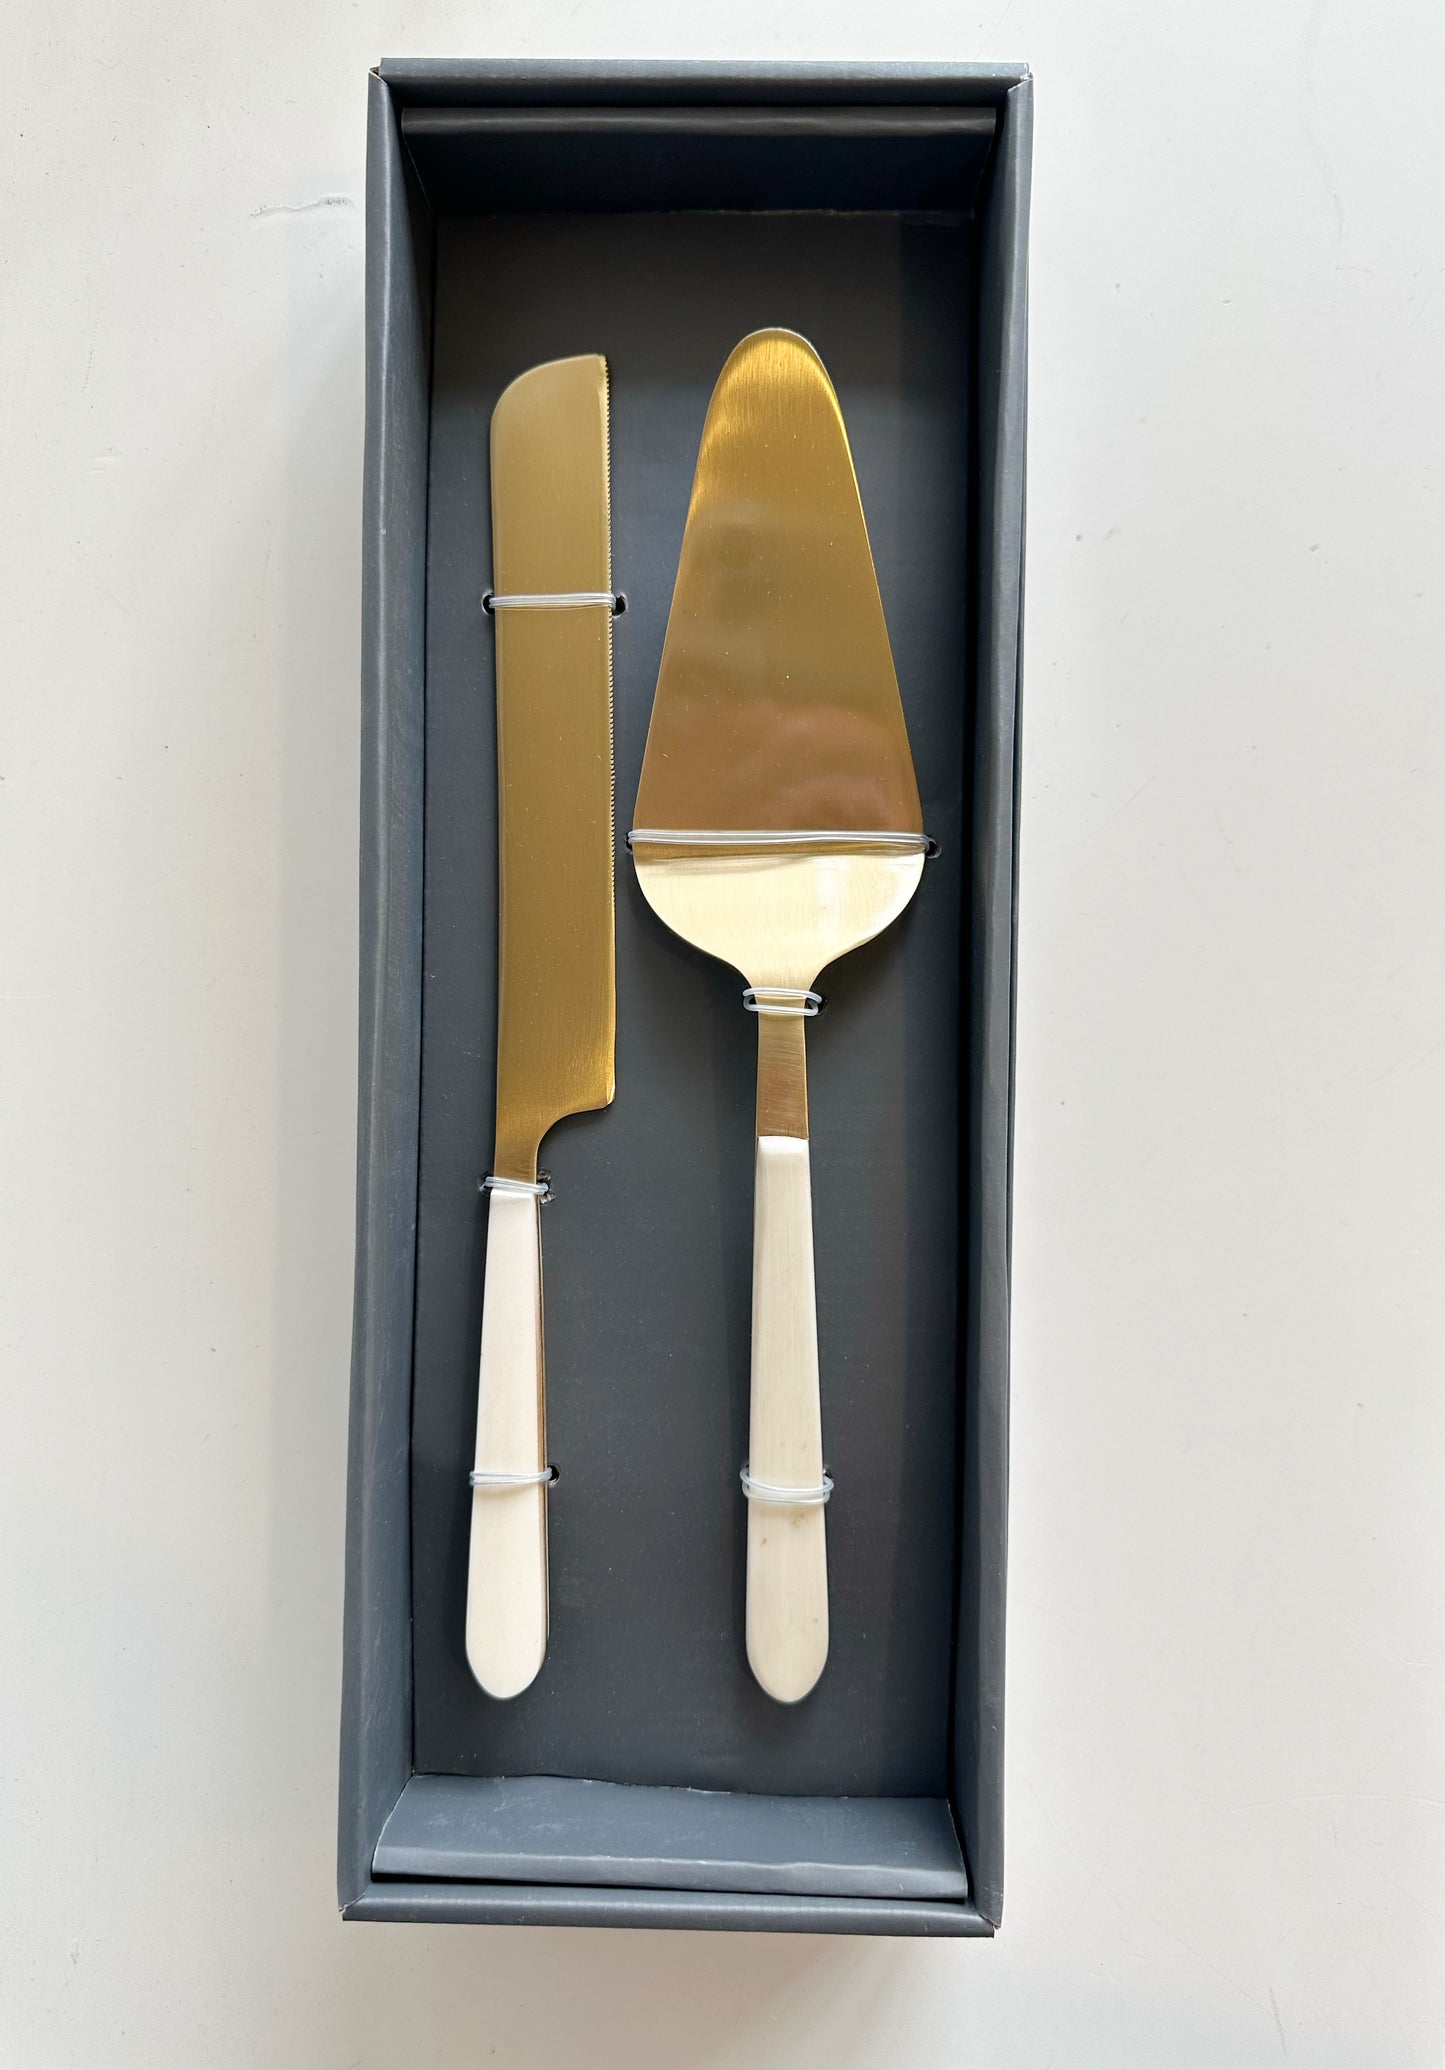 2 piece Cake Serving Set Gold with White Resin Handles